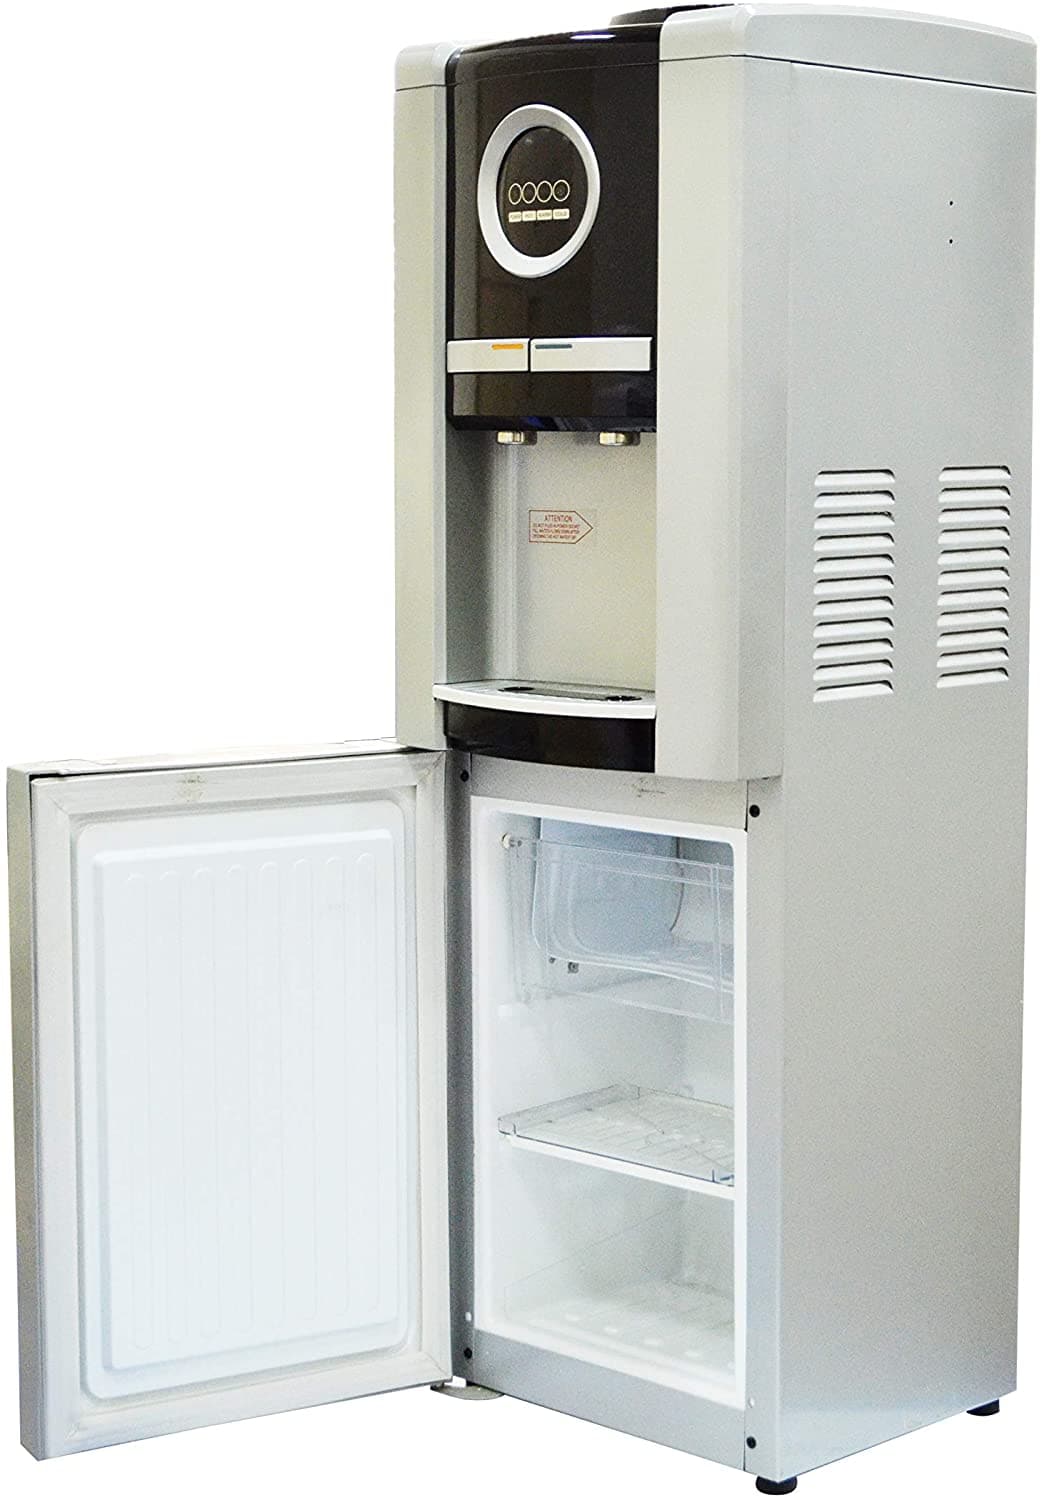 SURE G10 TOP LOAD WATER DISPENSER WITH REFRIGERATOR & FREEZER